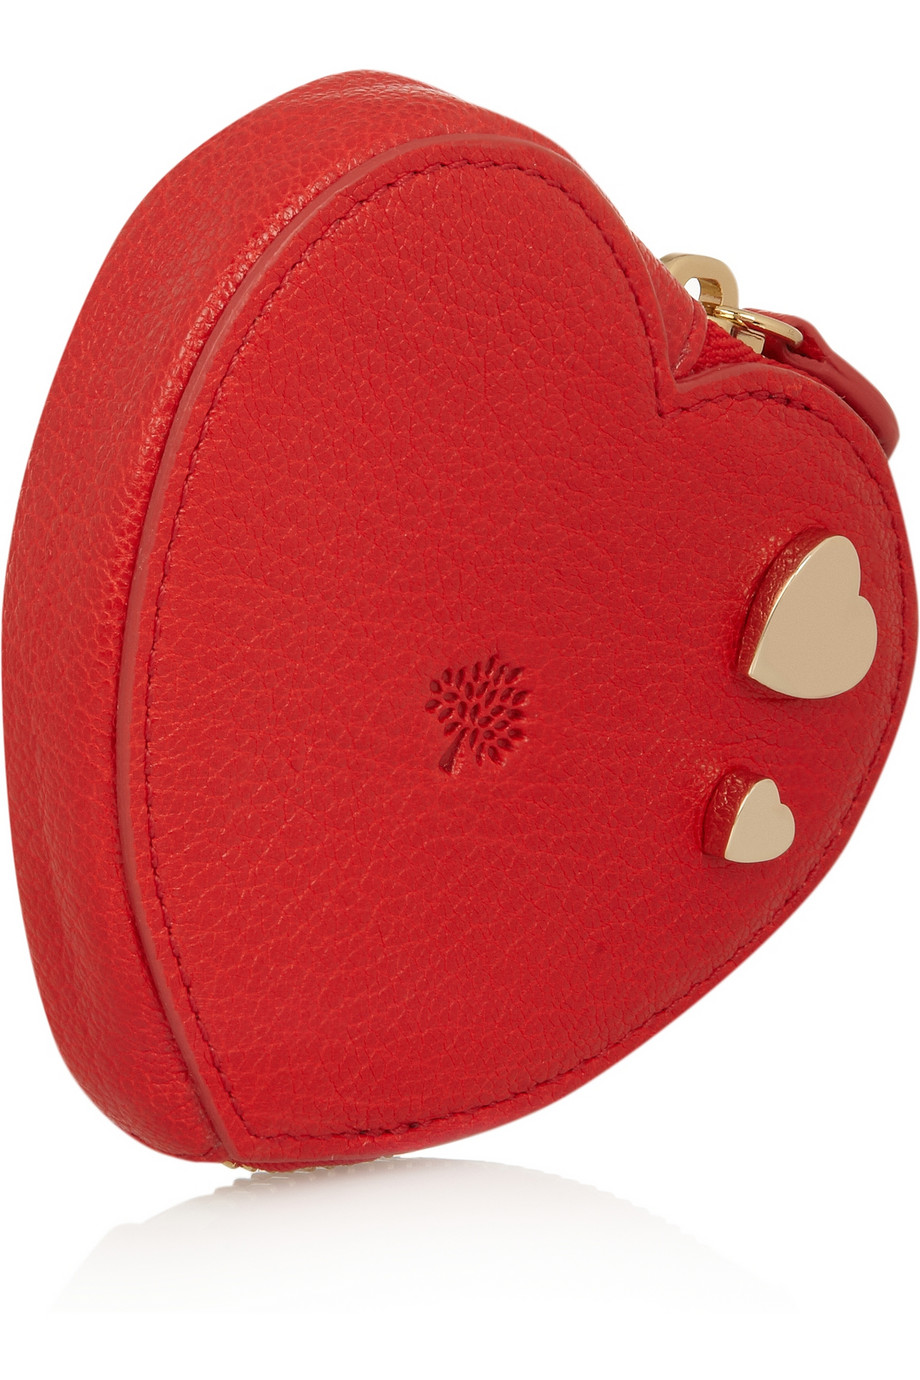 Mulberry Valentines Textured Leather Coin Purse - Lyst